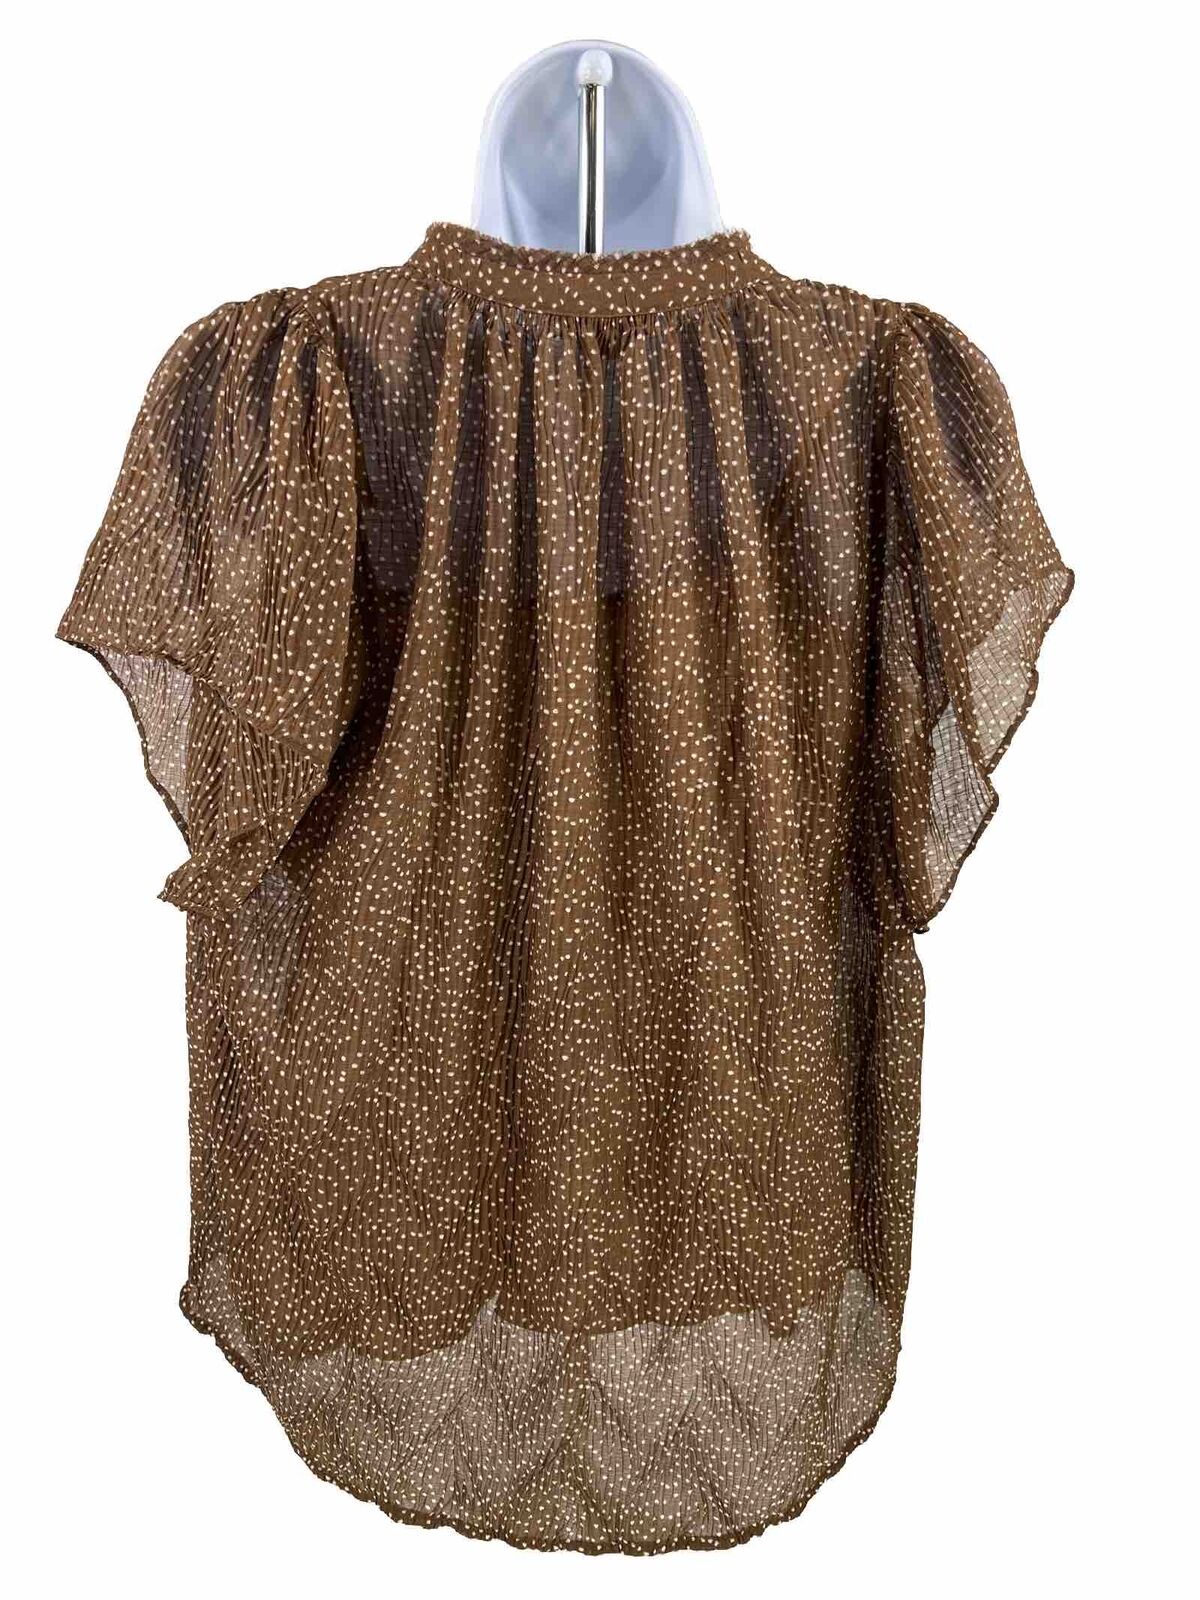 NEW Vince Women's Brown Starry Dot Sheer Lined Pleated Blouse - L